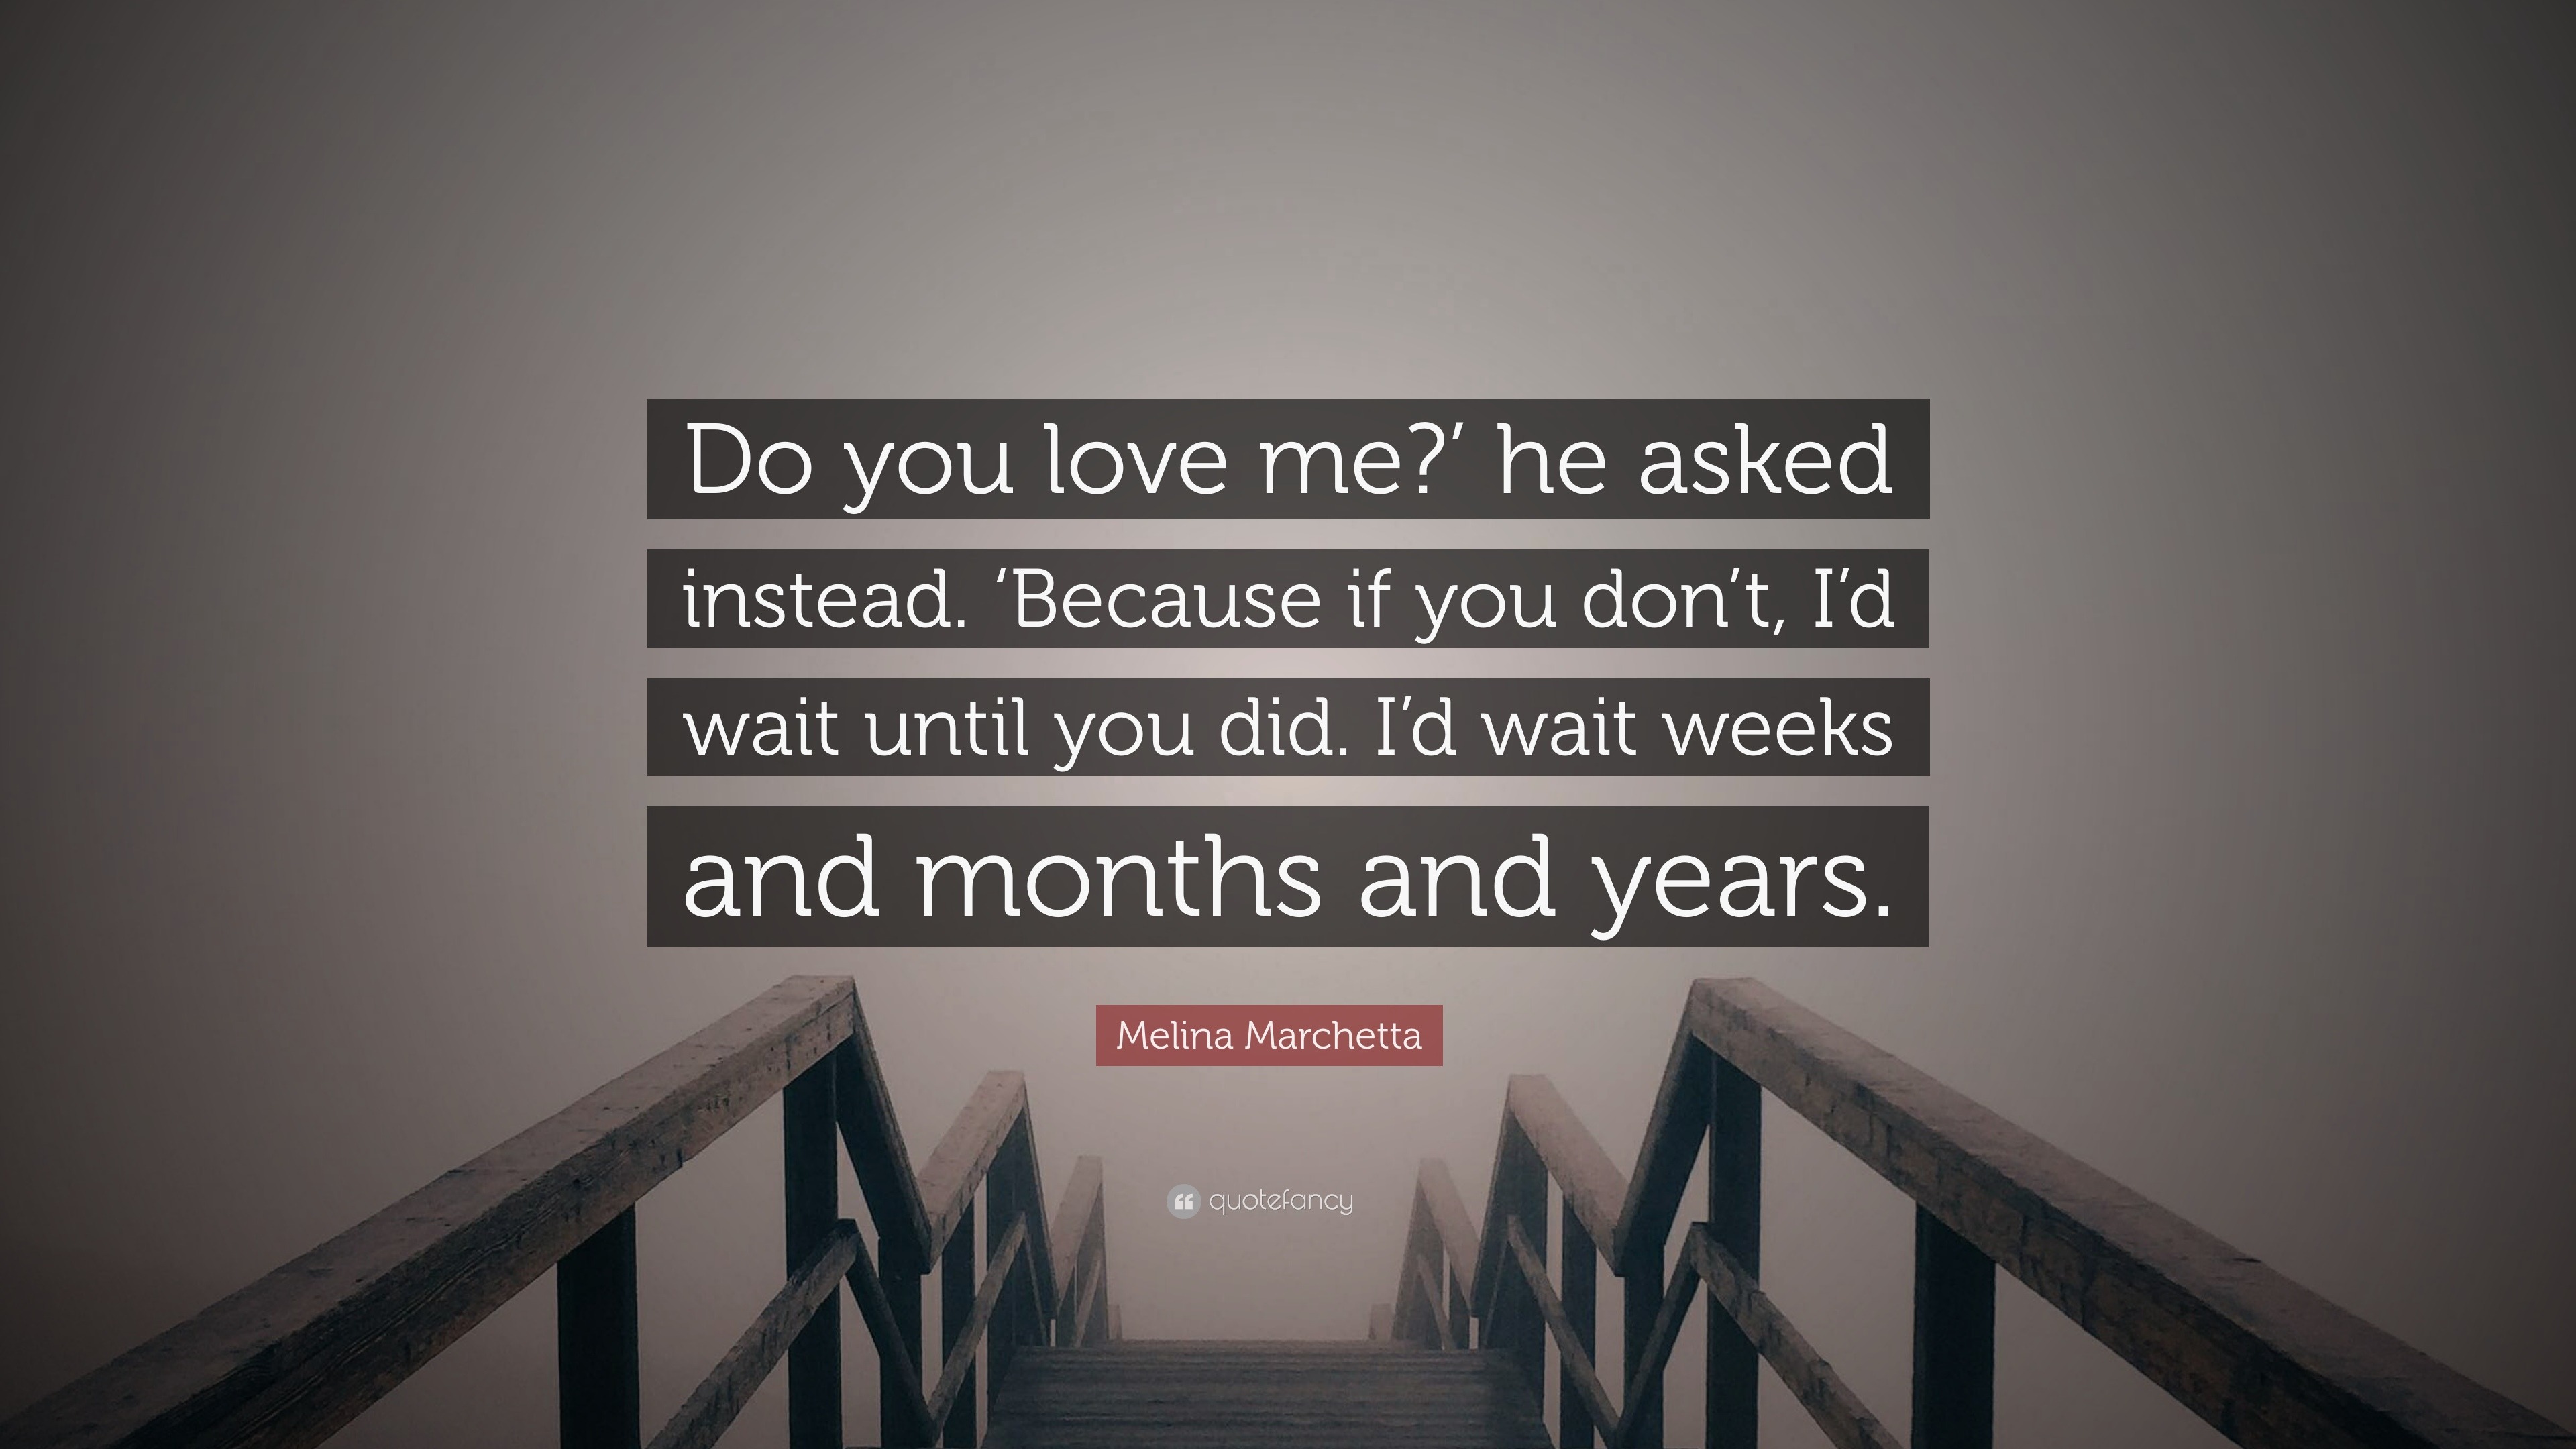 Melina Marchetta Quote “Do you love me he asked instead